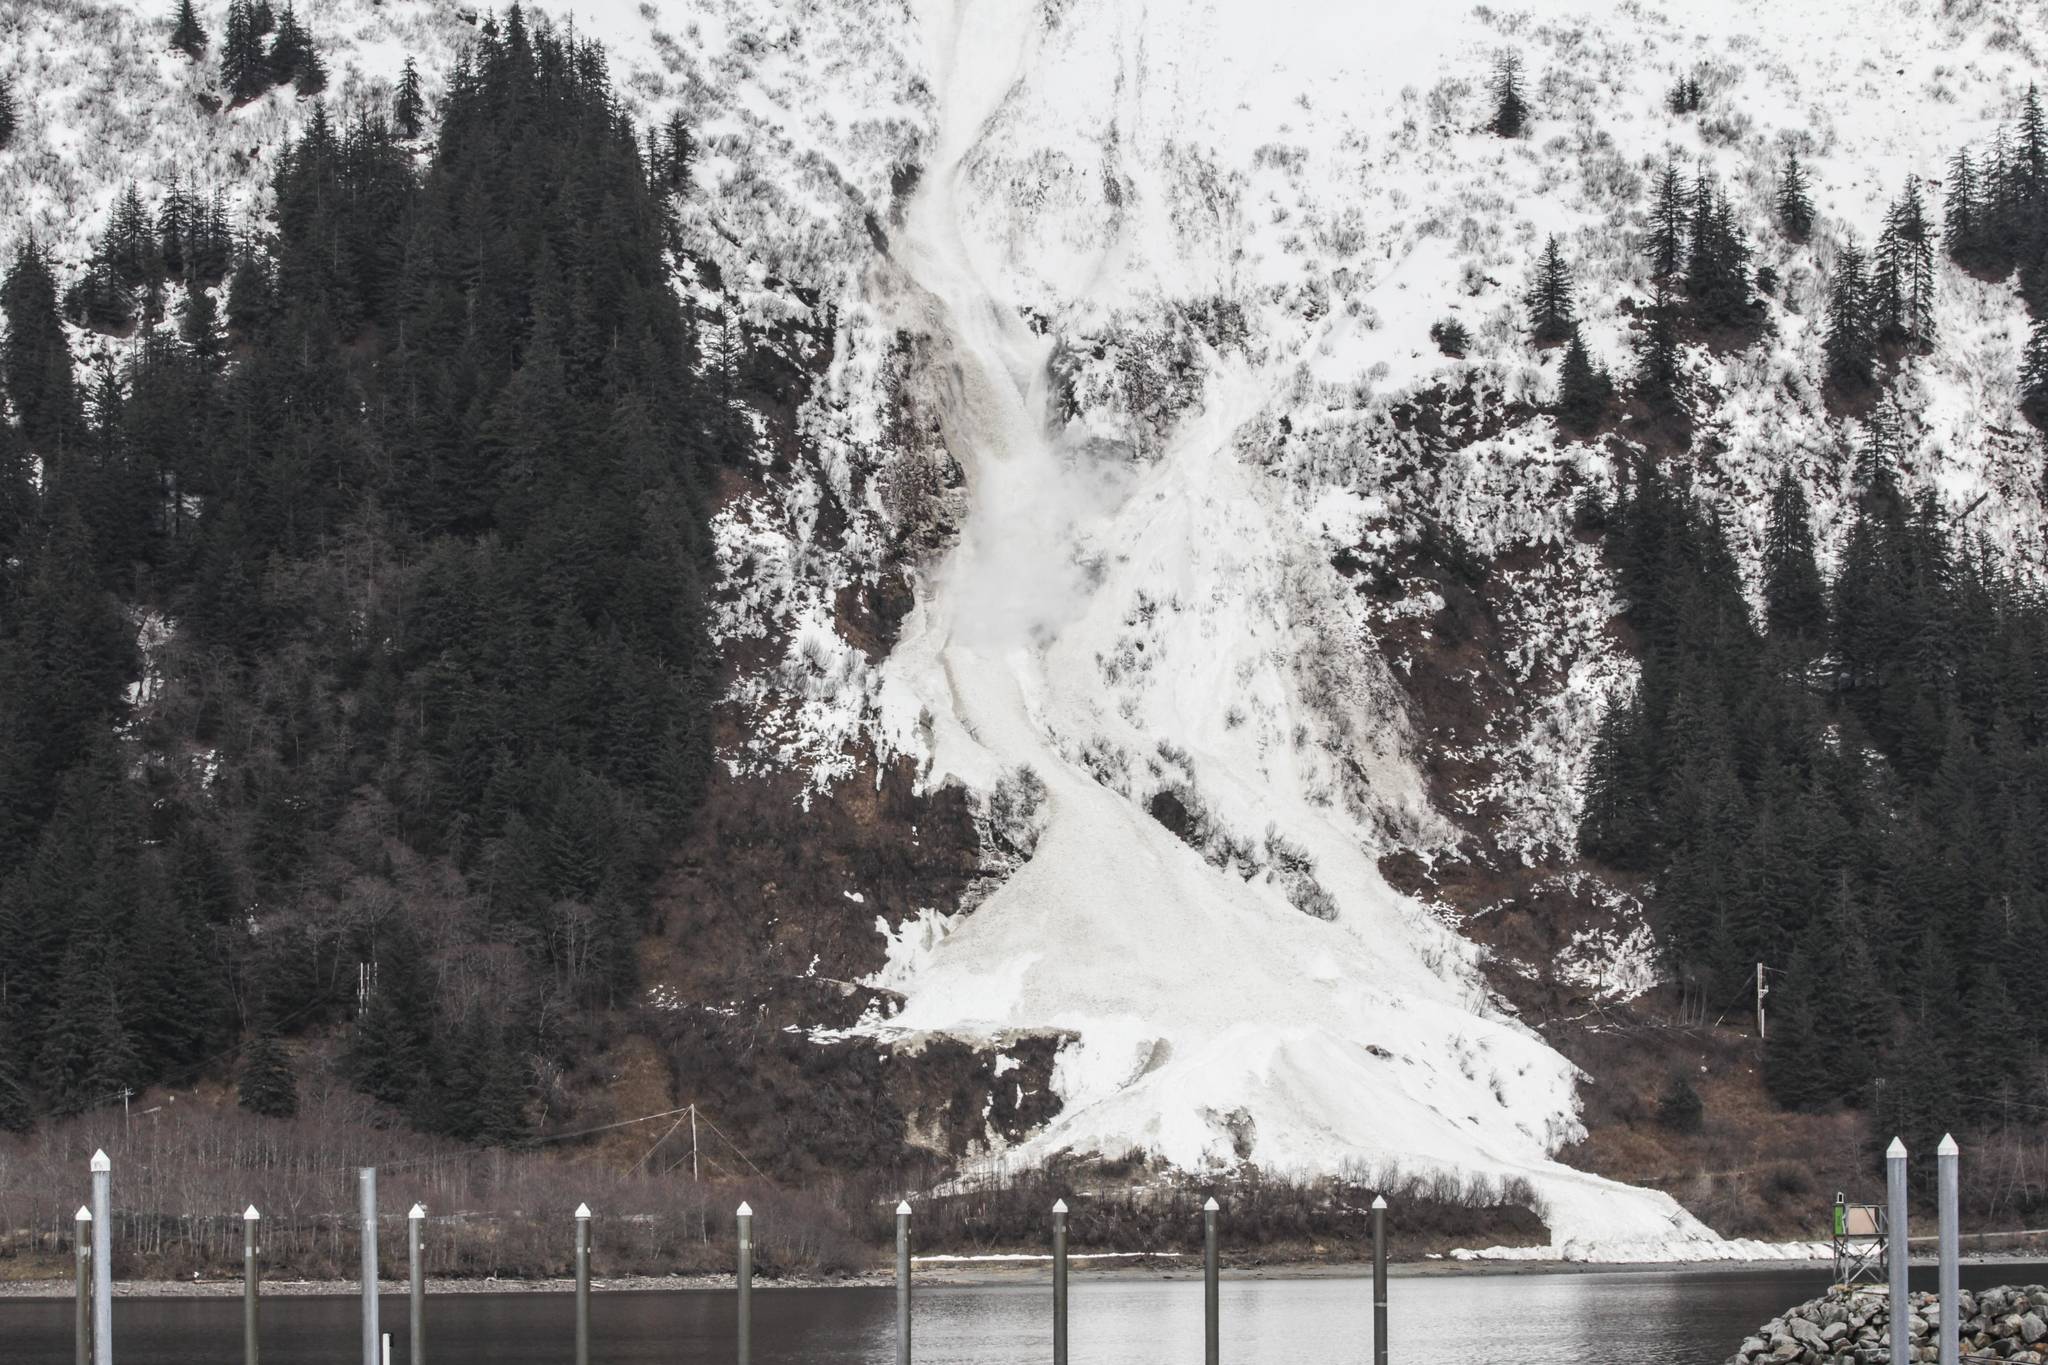 The Alaska Department of Transportation and Public Facilities triggered an avalanche as a mitigation measure above Thane Road on April 15, 2021. (Michael S. Lockett / Juneau Empire)